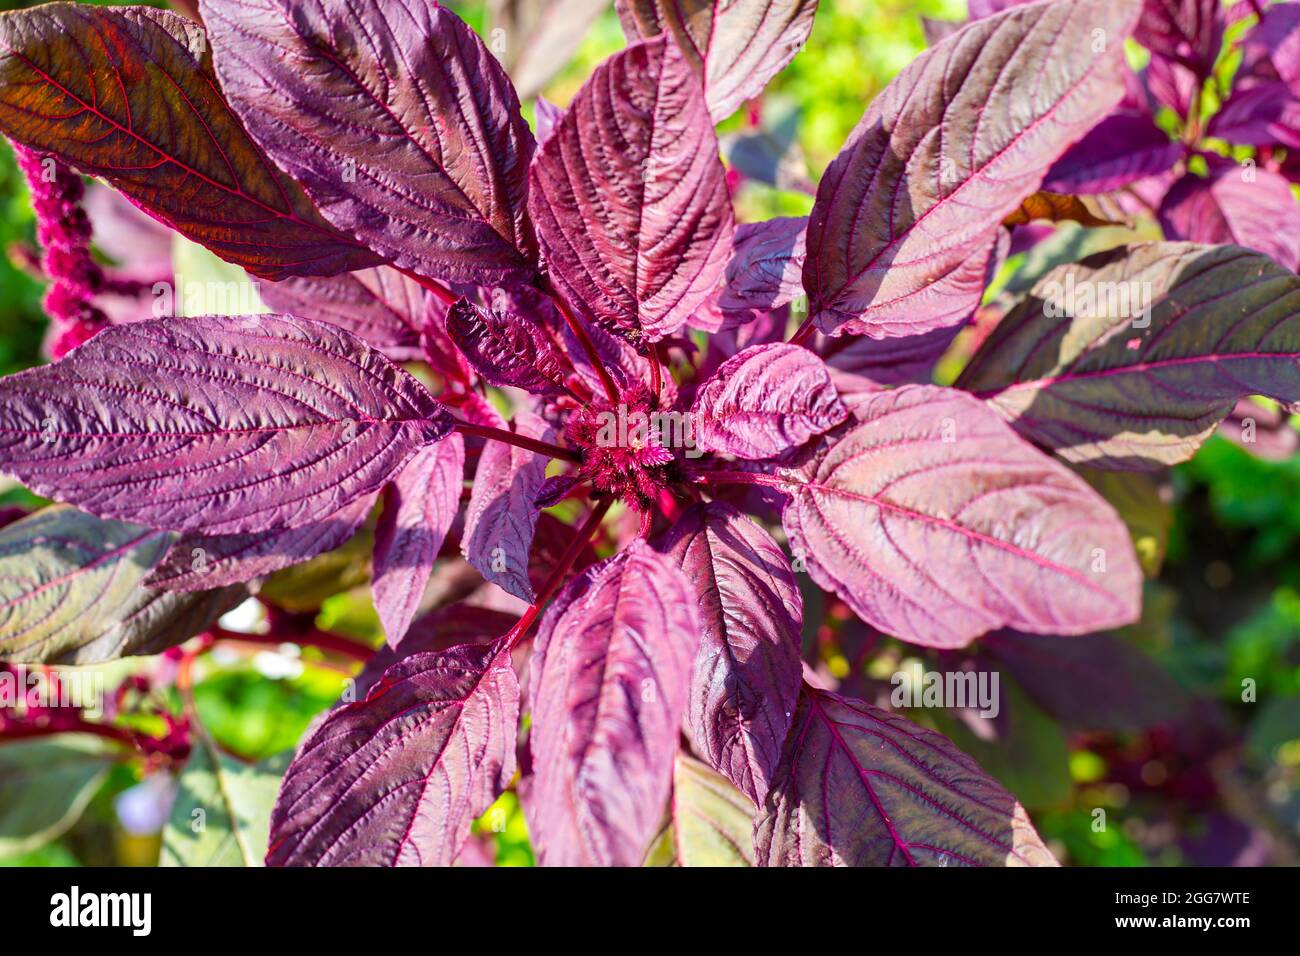 Blooming purple vegetable amaranth plant. Growing and caring for flowers in the garden. Stock Photo